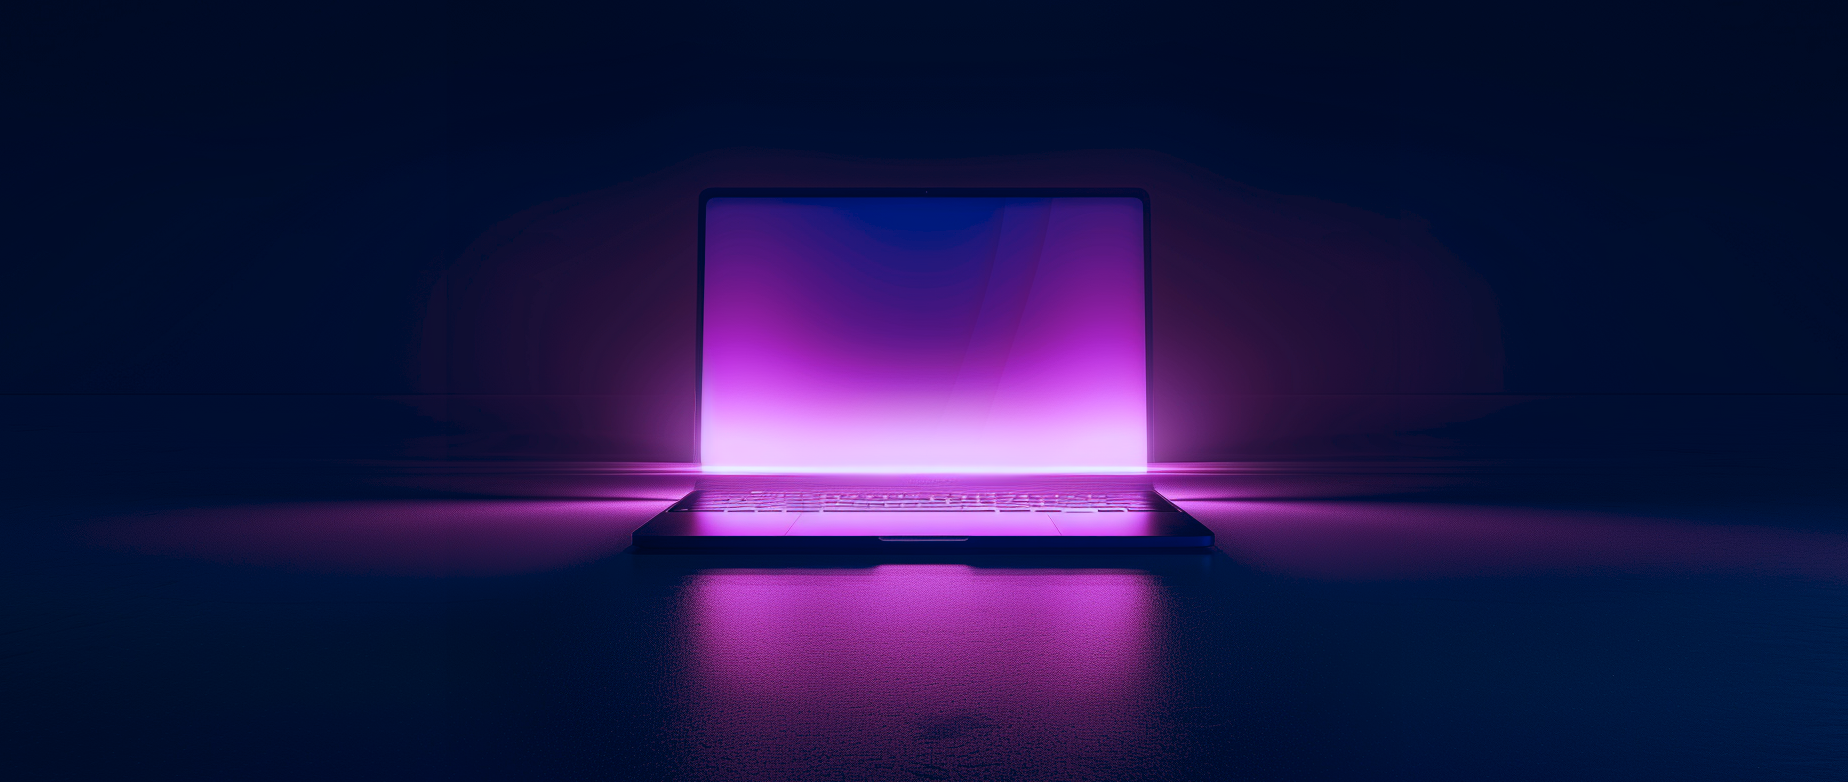 An open laptop with a purple screen on a dark background.